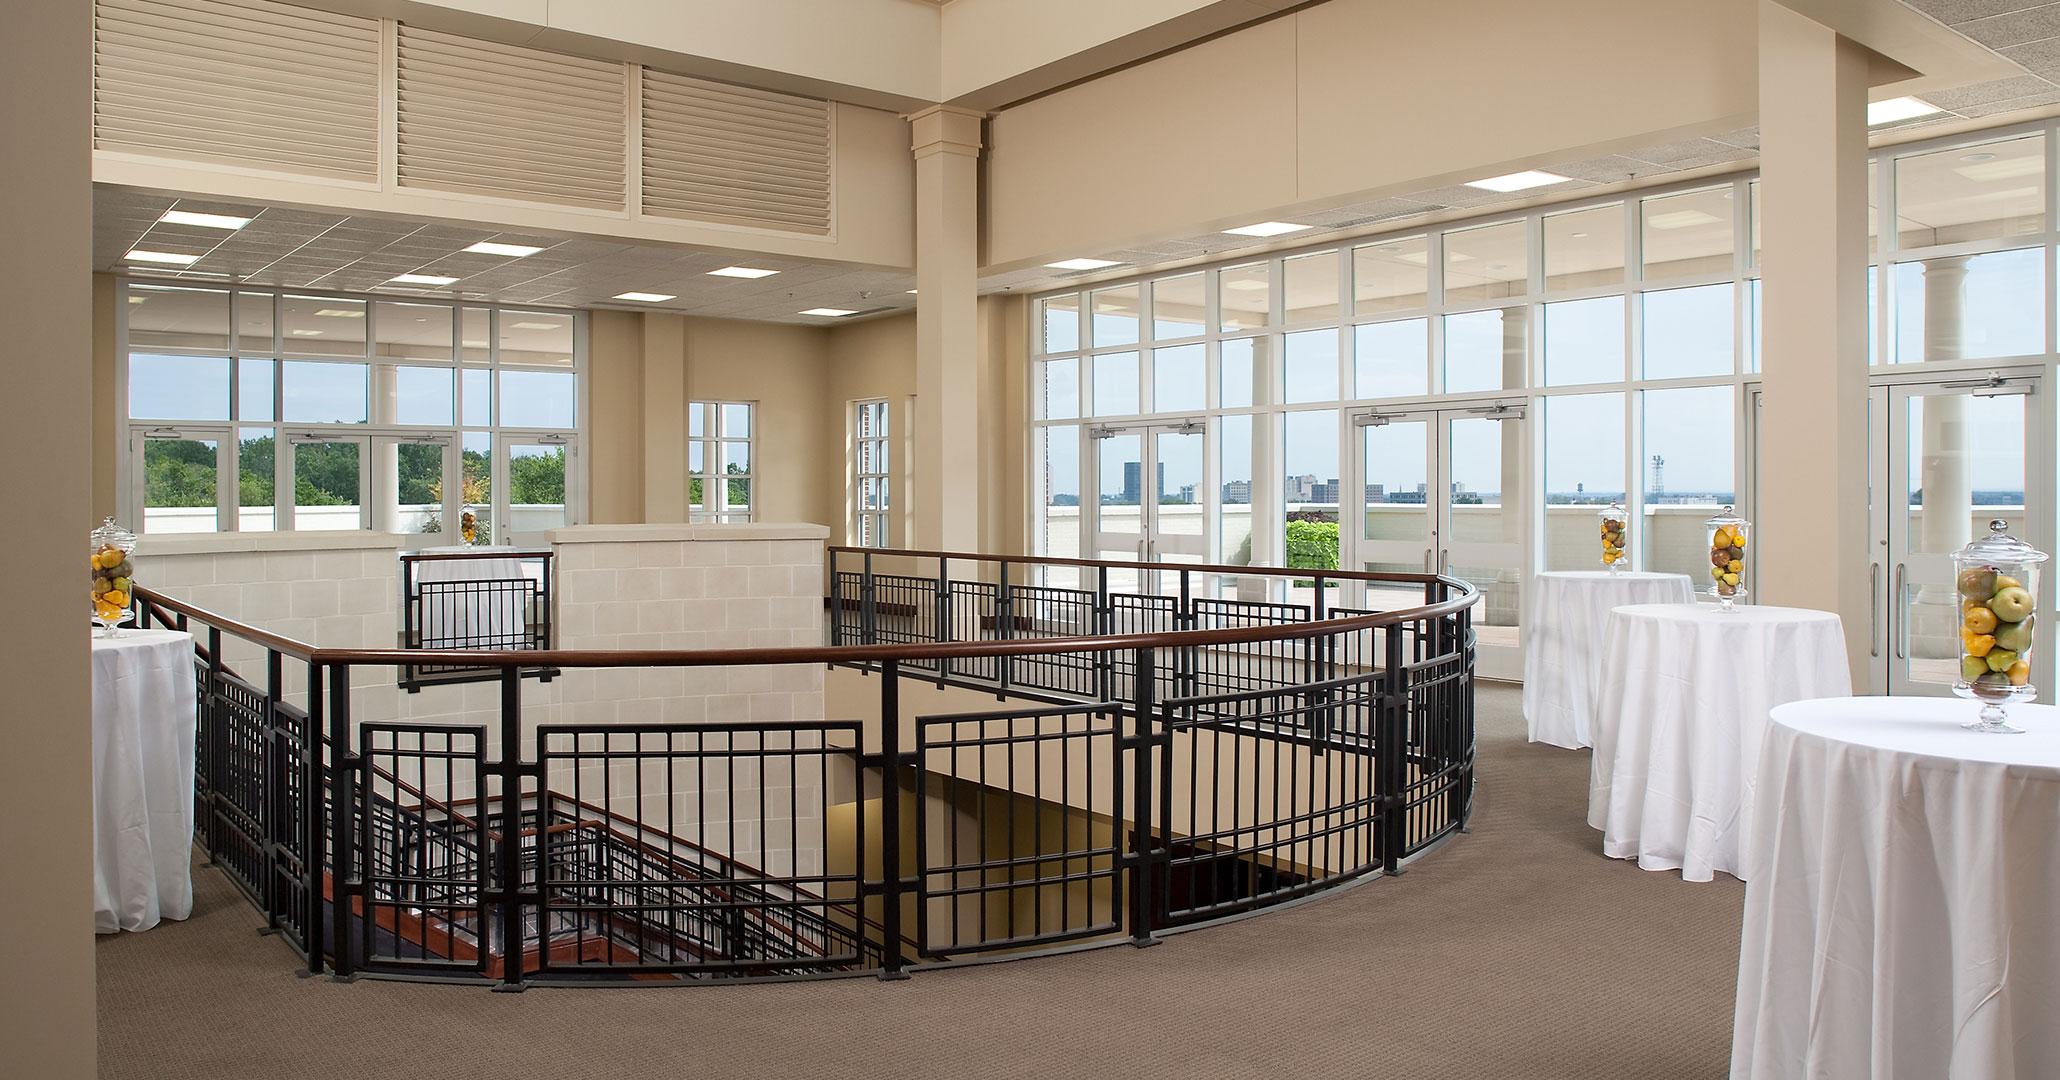 North Augusta Municipal Center worked with Boudreaux architects to design impactful spaces.